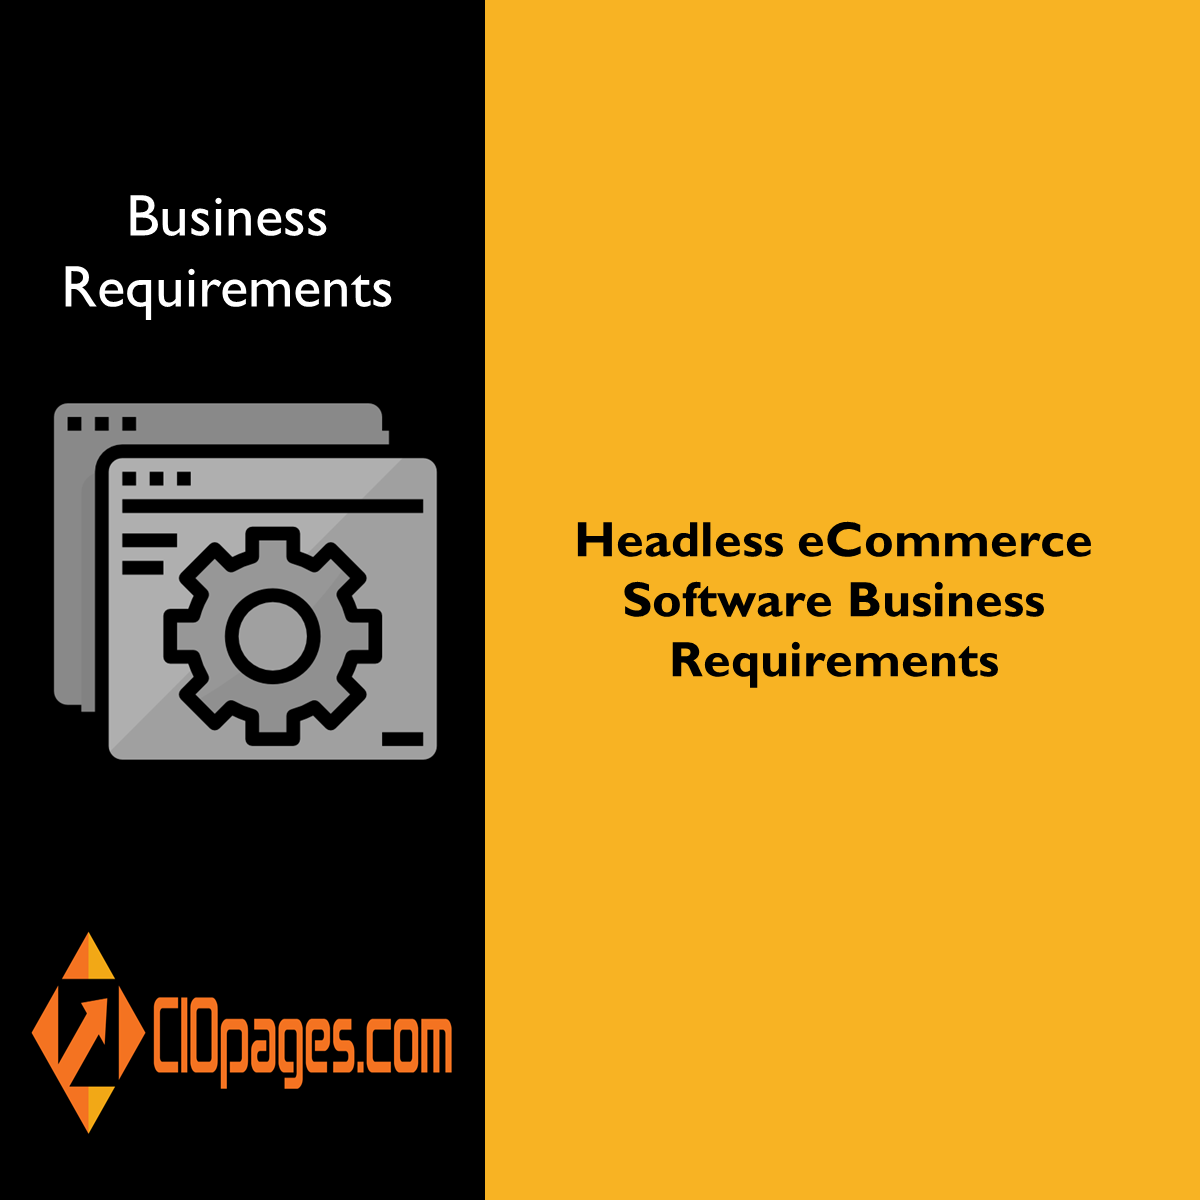 Headless eCommerce Software Business Requirements